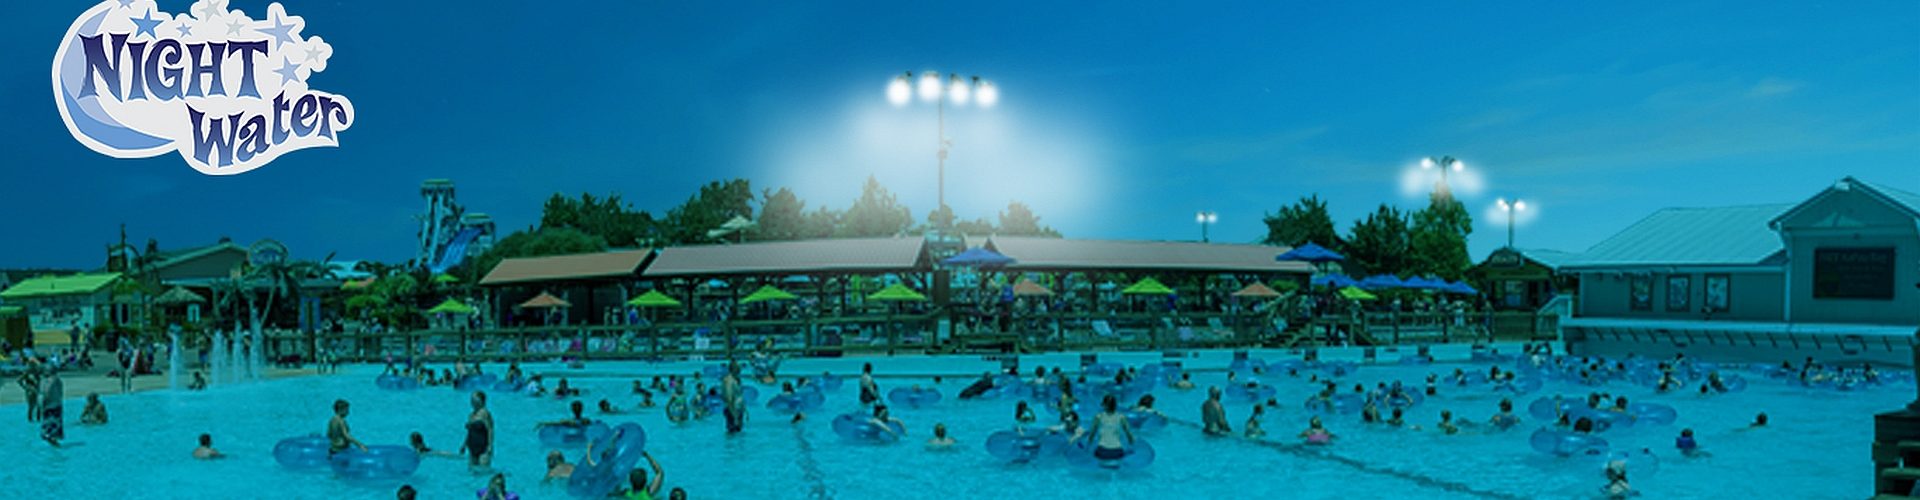 Night Water at White Water Branson from July 15 - August 12, 2017